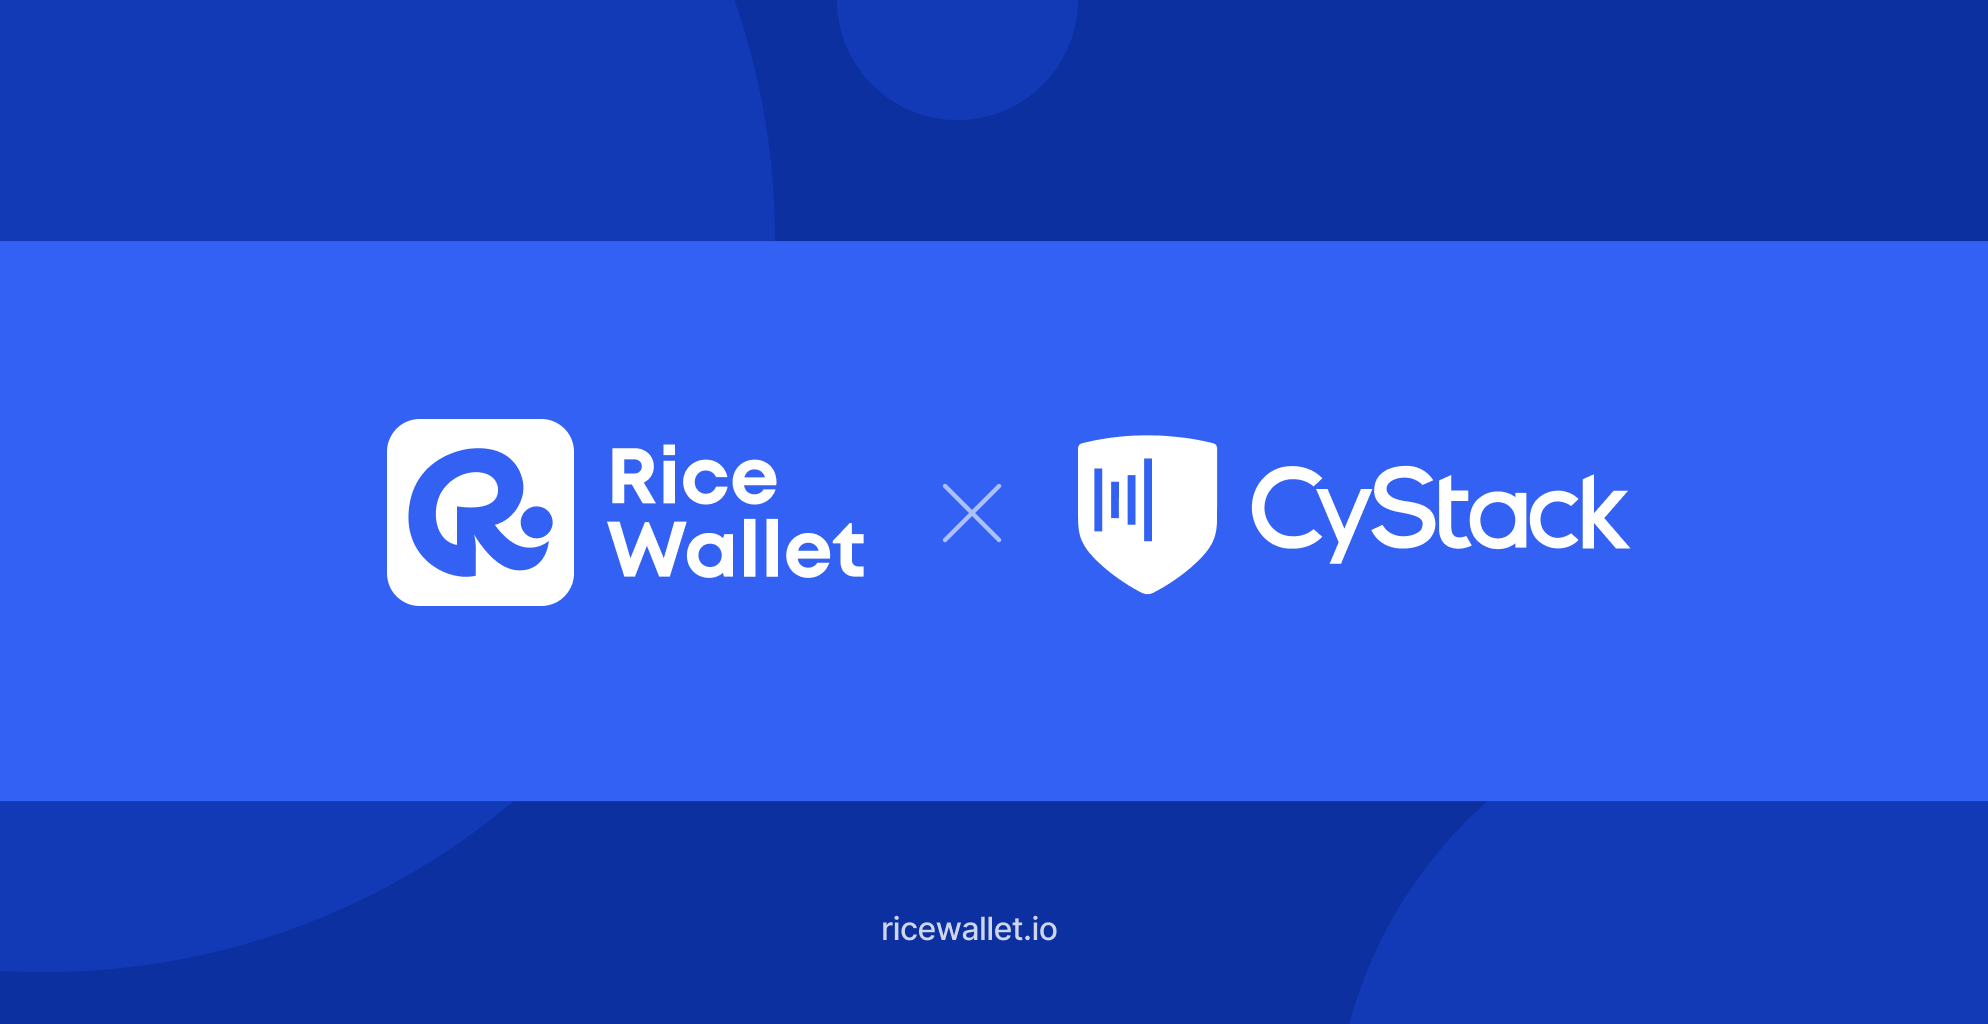 RICE Wallet x Cystack